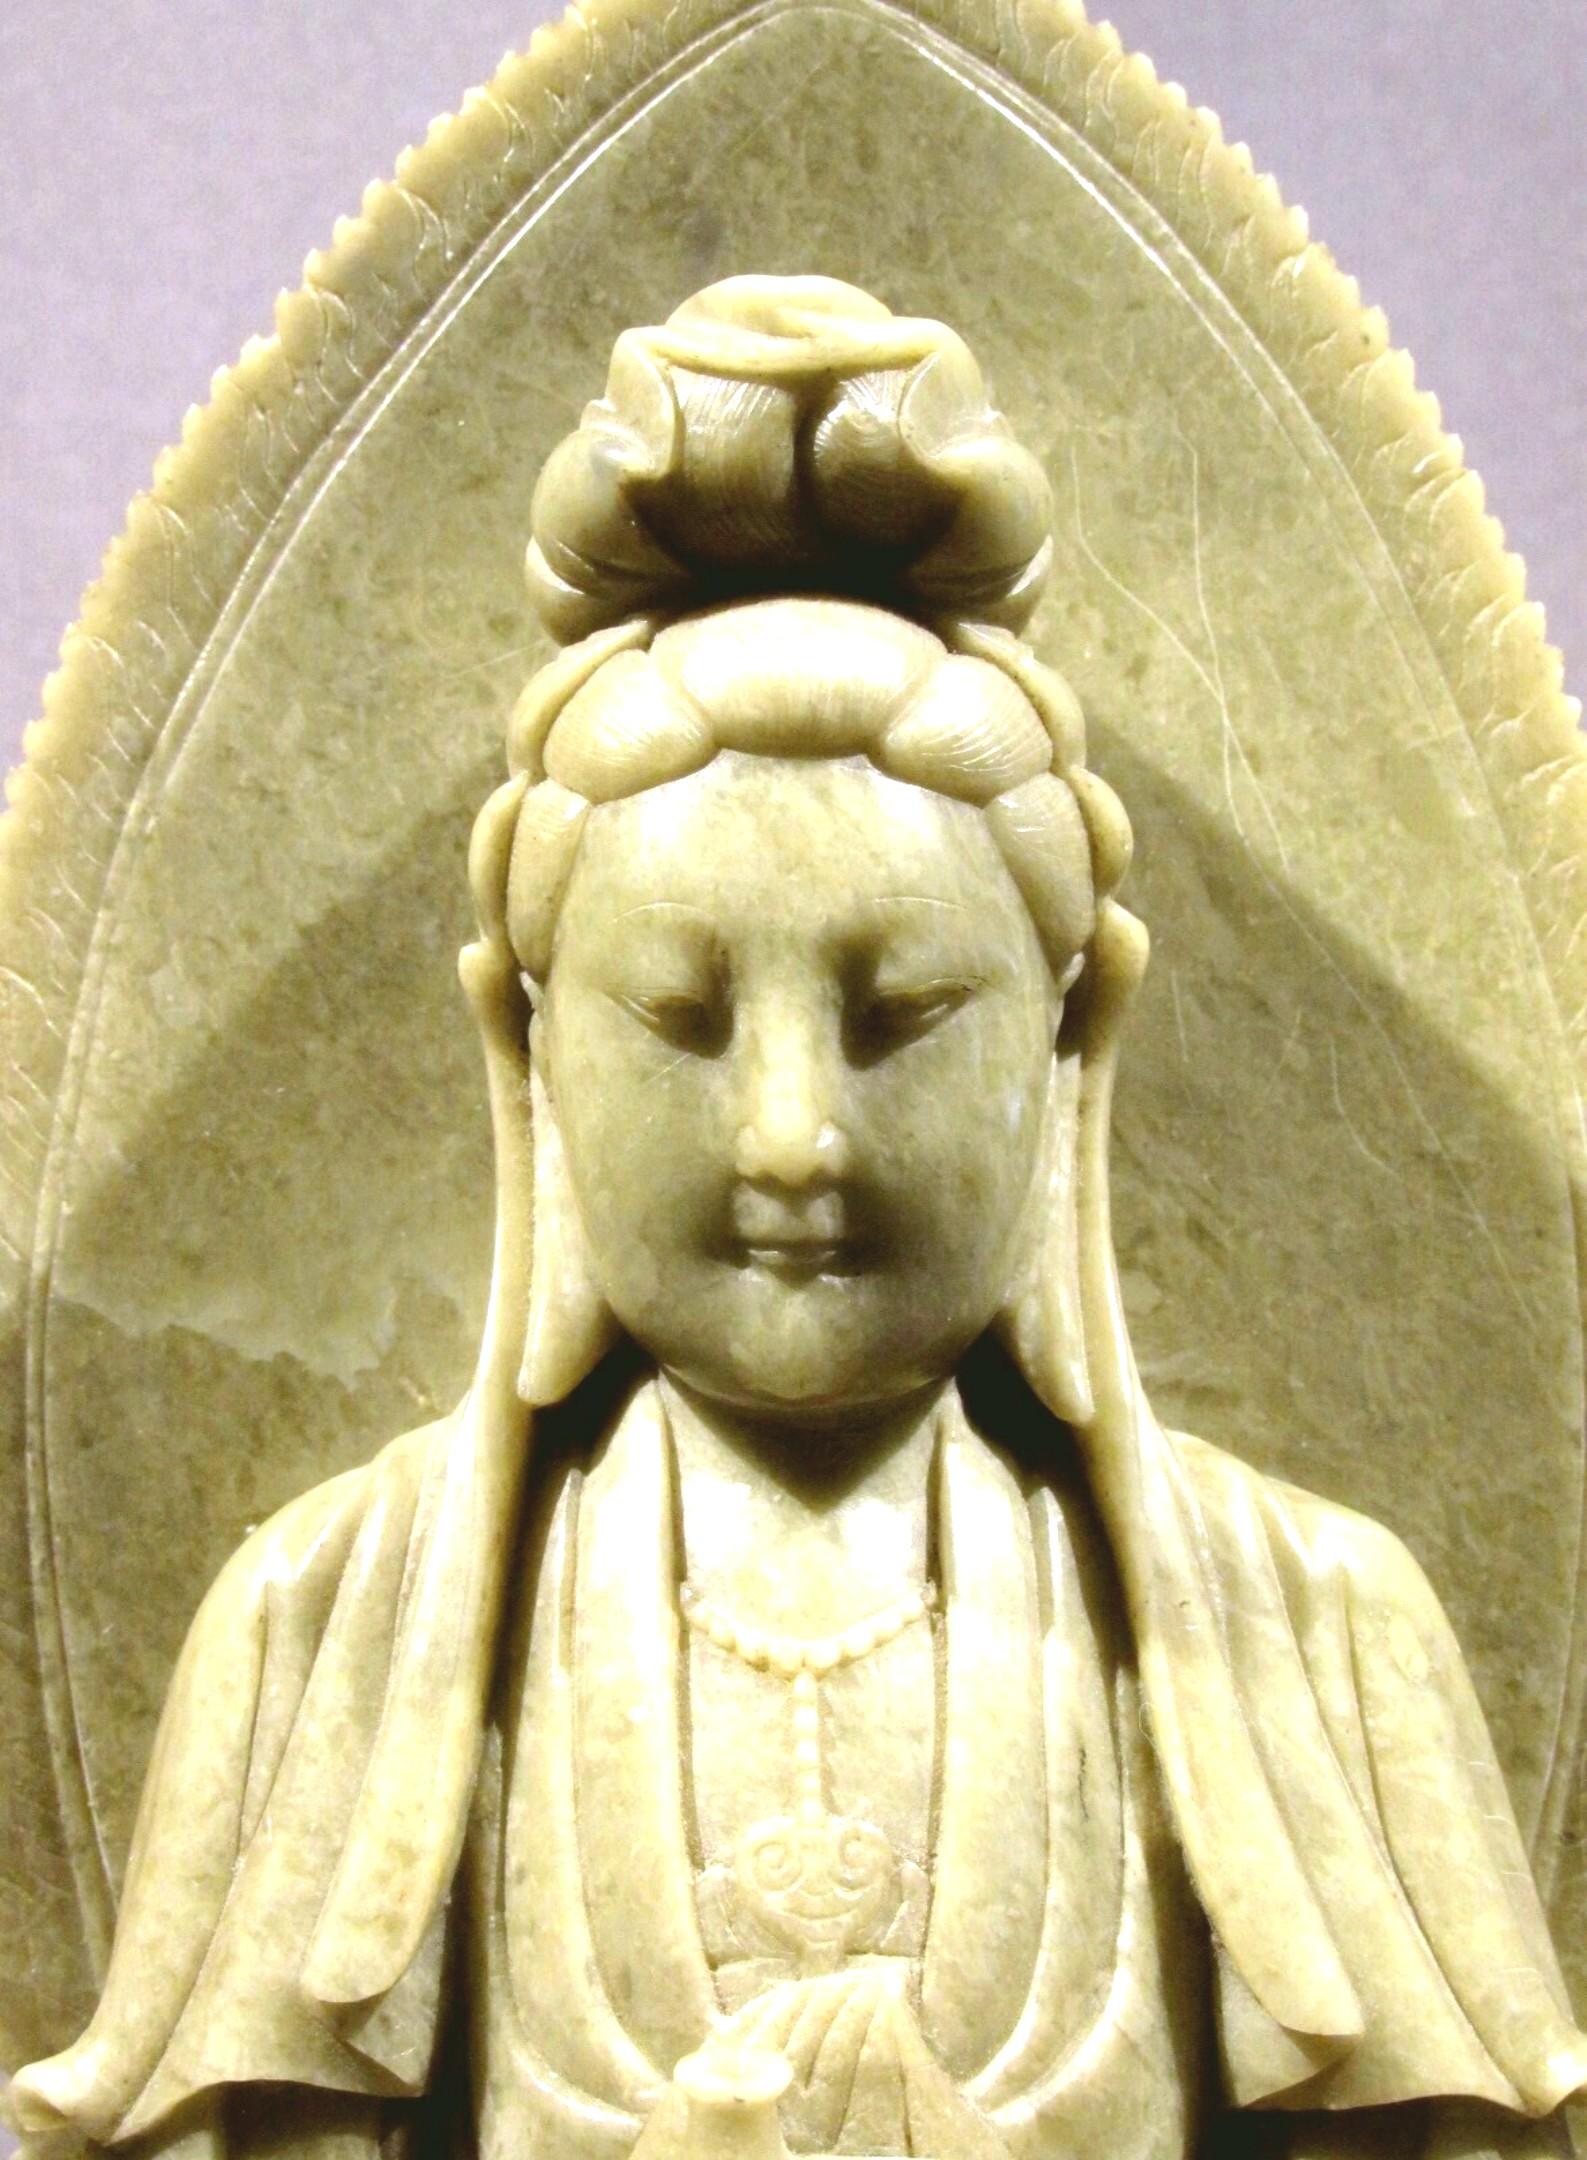 In Indian Buddhism, Avalokiteshvara is a male Bodhisattva, however in Chinese Buddhism he takes the form of the female Bodhisattva, Guanyin - ‘The One Who Hears the Cries of the World’, also known as The 'Goddess of Compassion'. 
Shown here in a